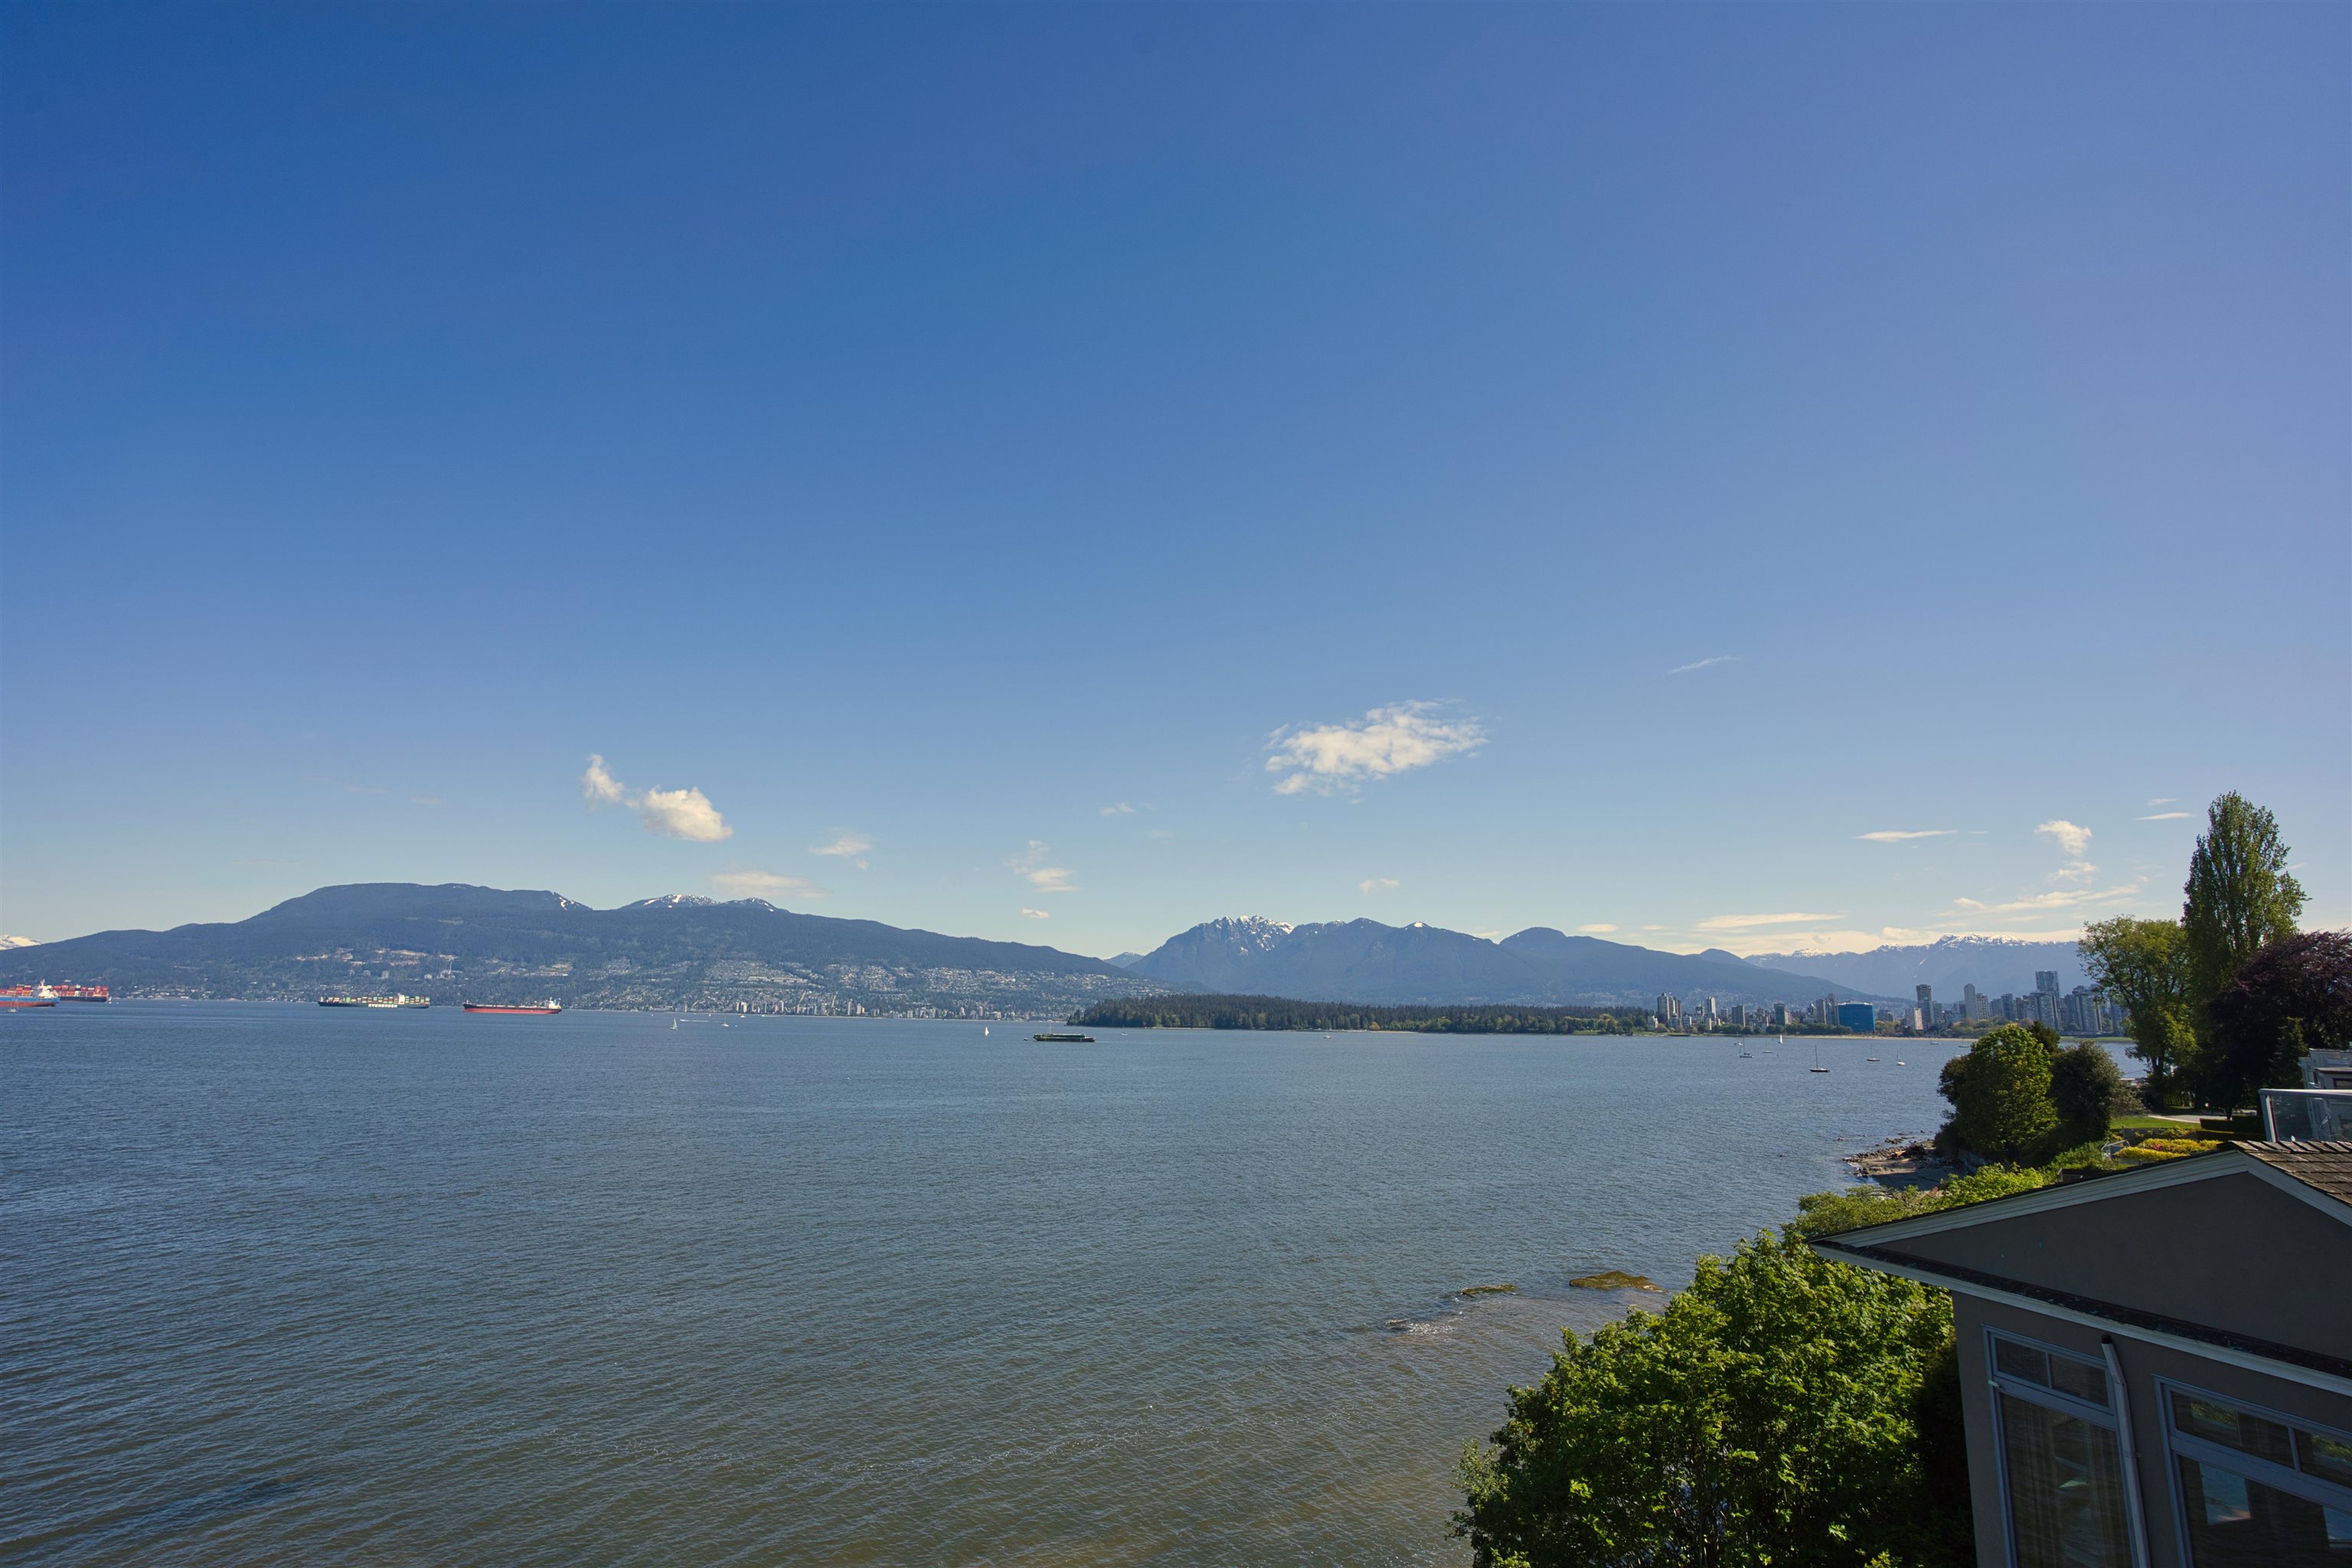 Listing image of 2711 POINT GREY ROAD